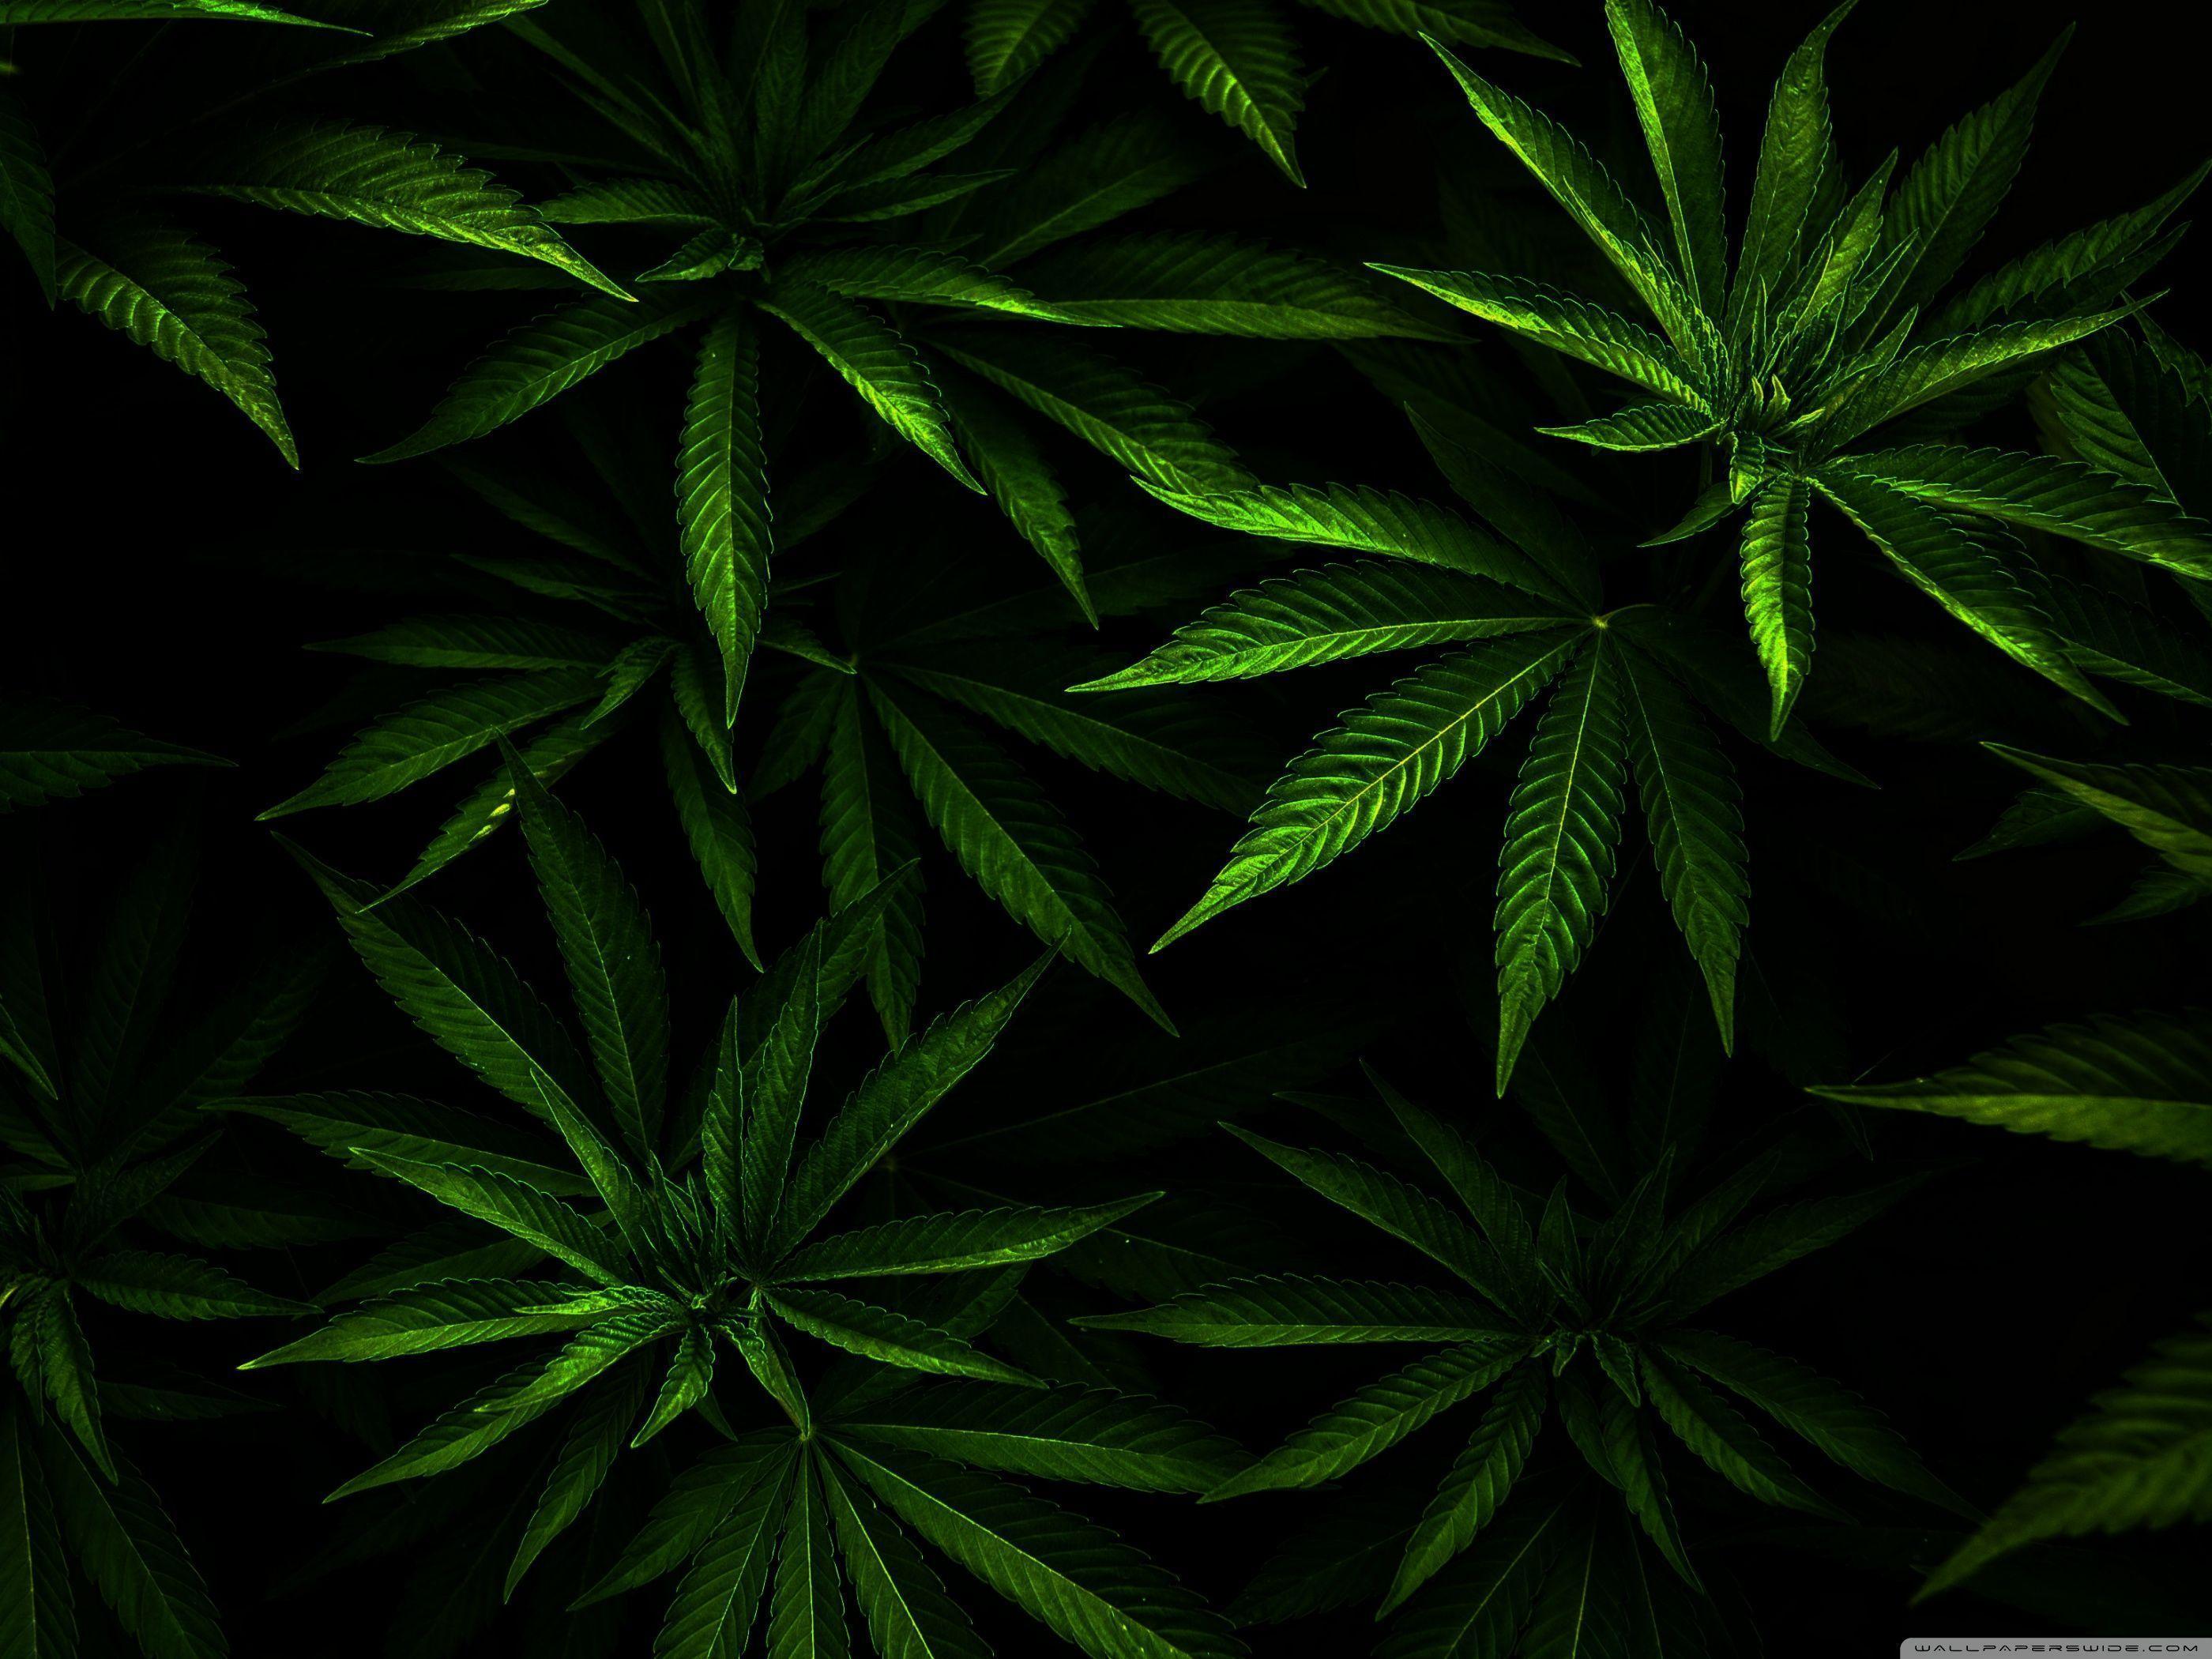 A close up of some green leaves - Weed